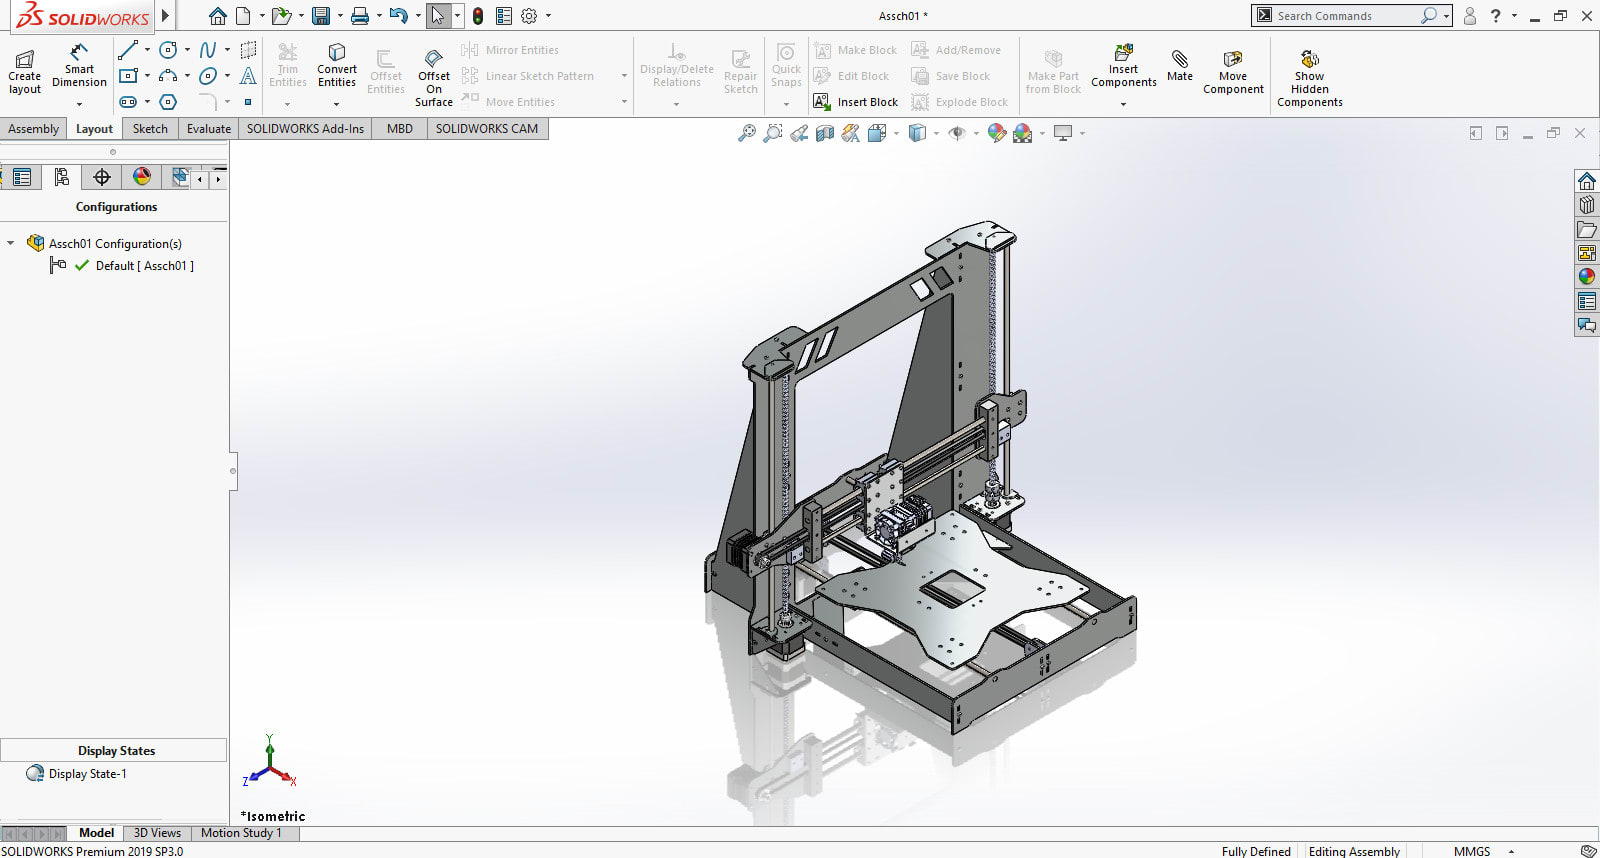 Design 3d models for 3d printing and manufacturing using solidworks by Noornazir382 Fiverr